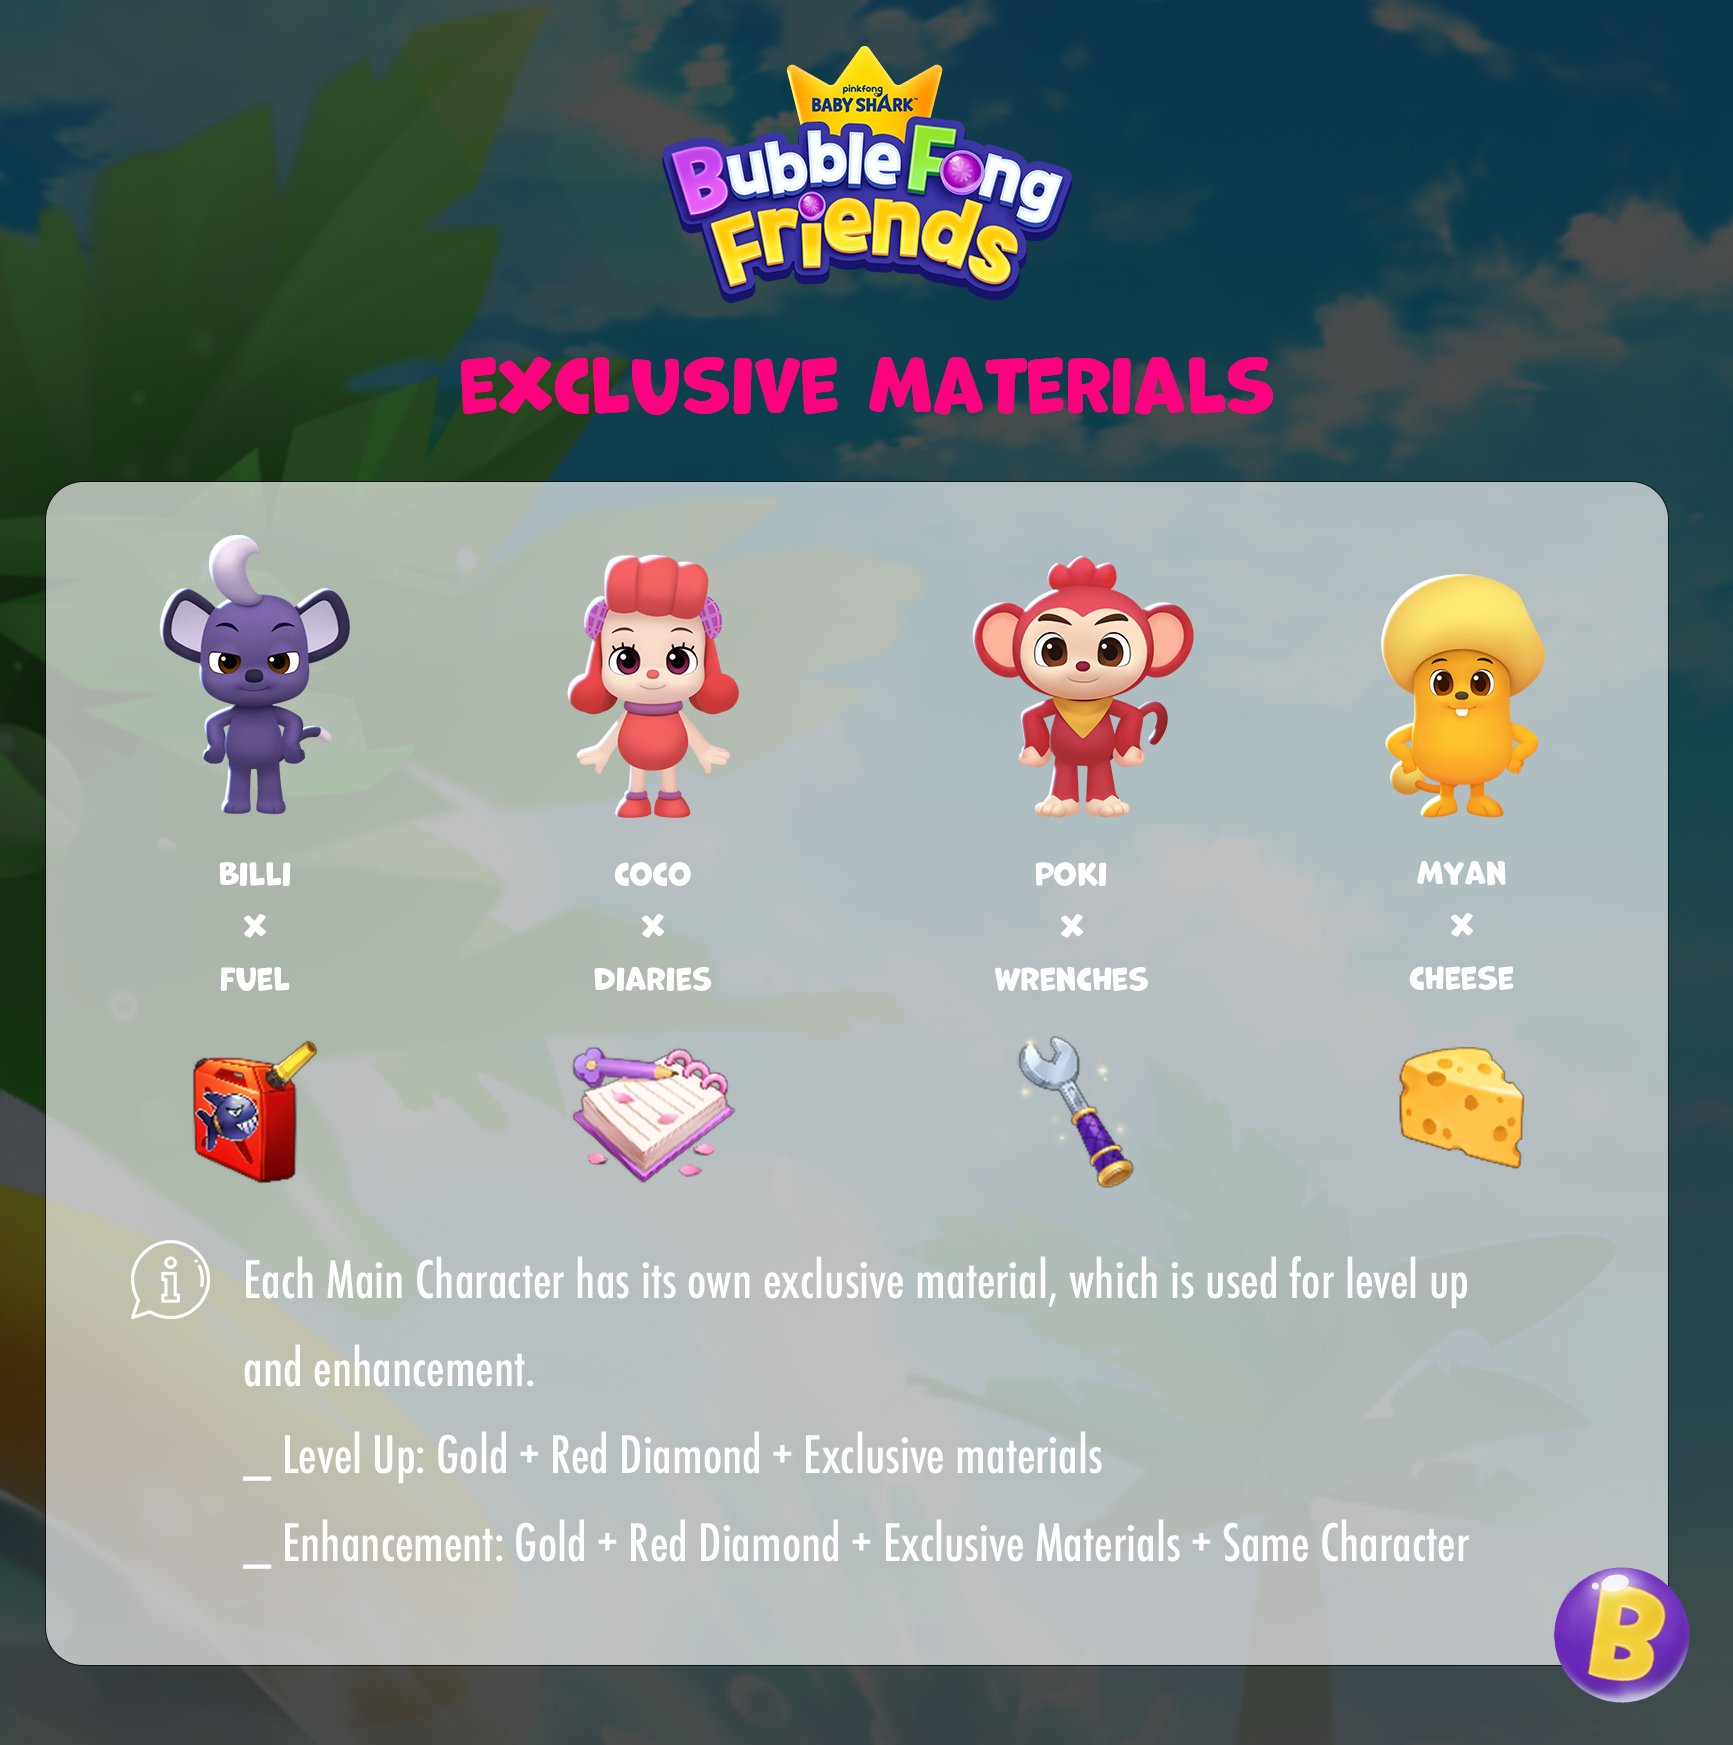 Baby Shark BubbleFong Friends on X: [🔖] Exclusive Materials #2 Billi -  Fuel Coco - Diaries Poki - Wrenches Myan - Cheese 🦀 In Baby Shark  BubbleFong Friends game, each Main Character